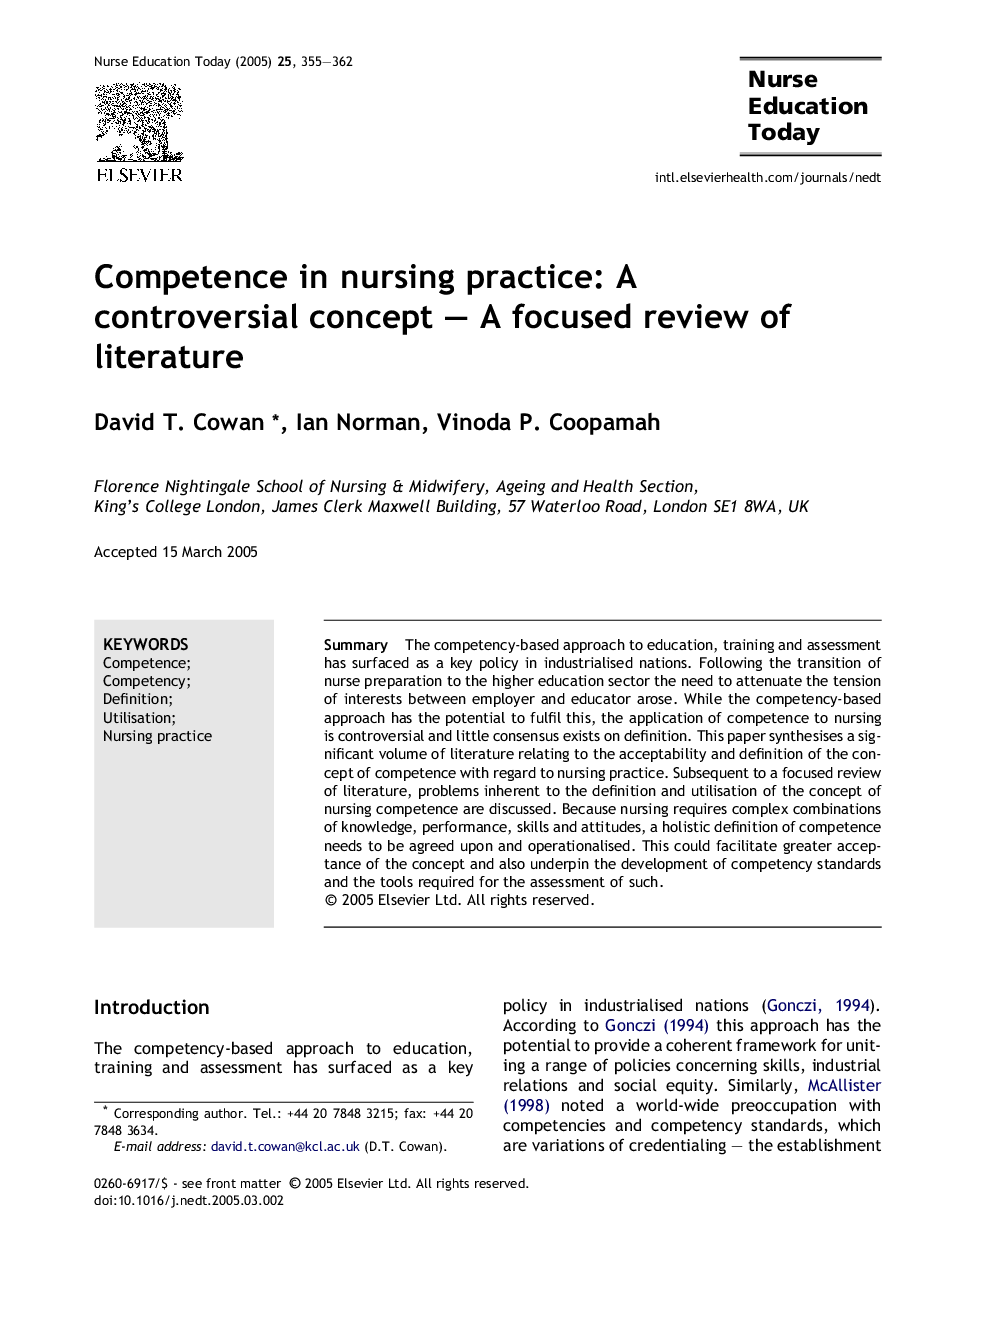 Competence in nursing practice: A controversial concept - A focused review of literature